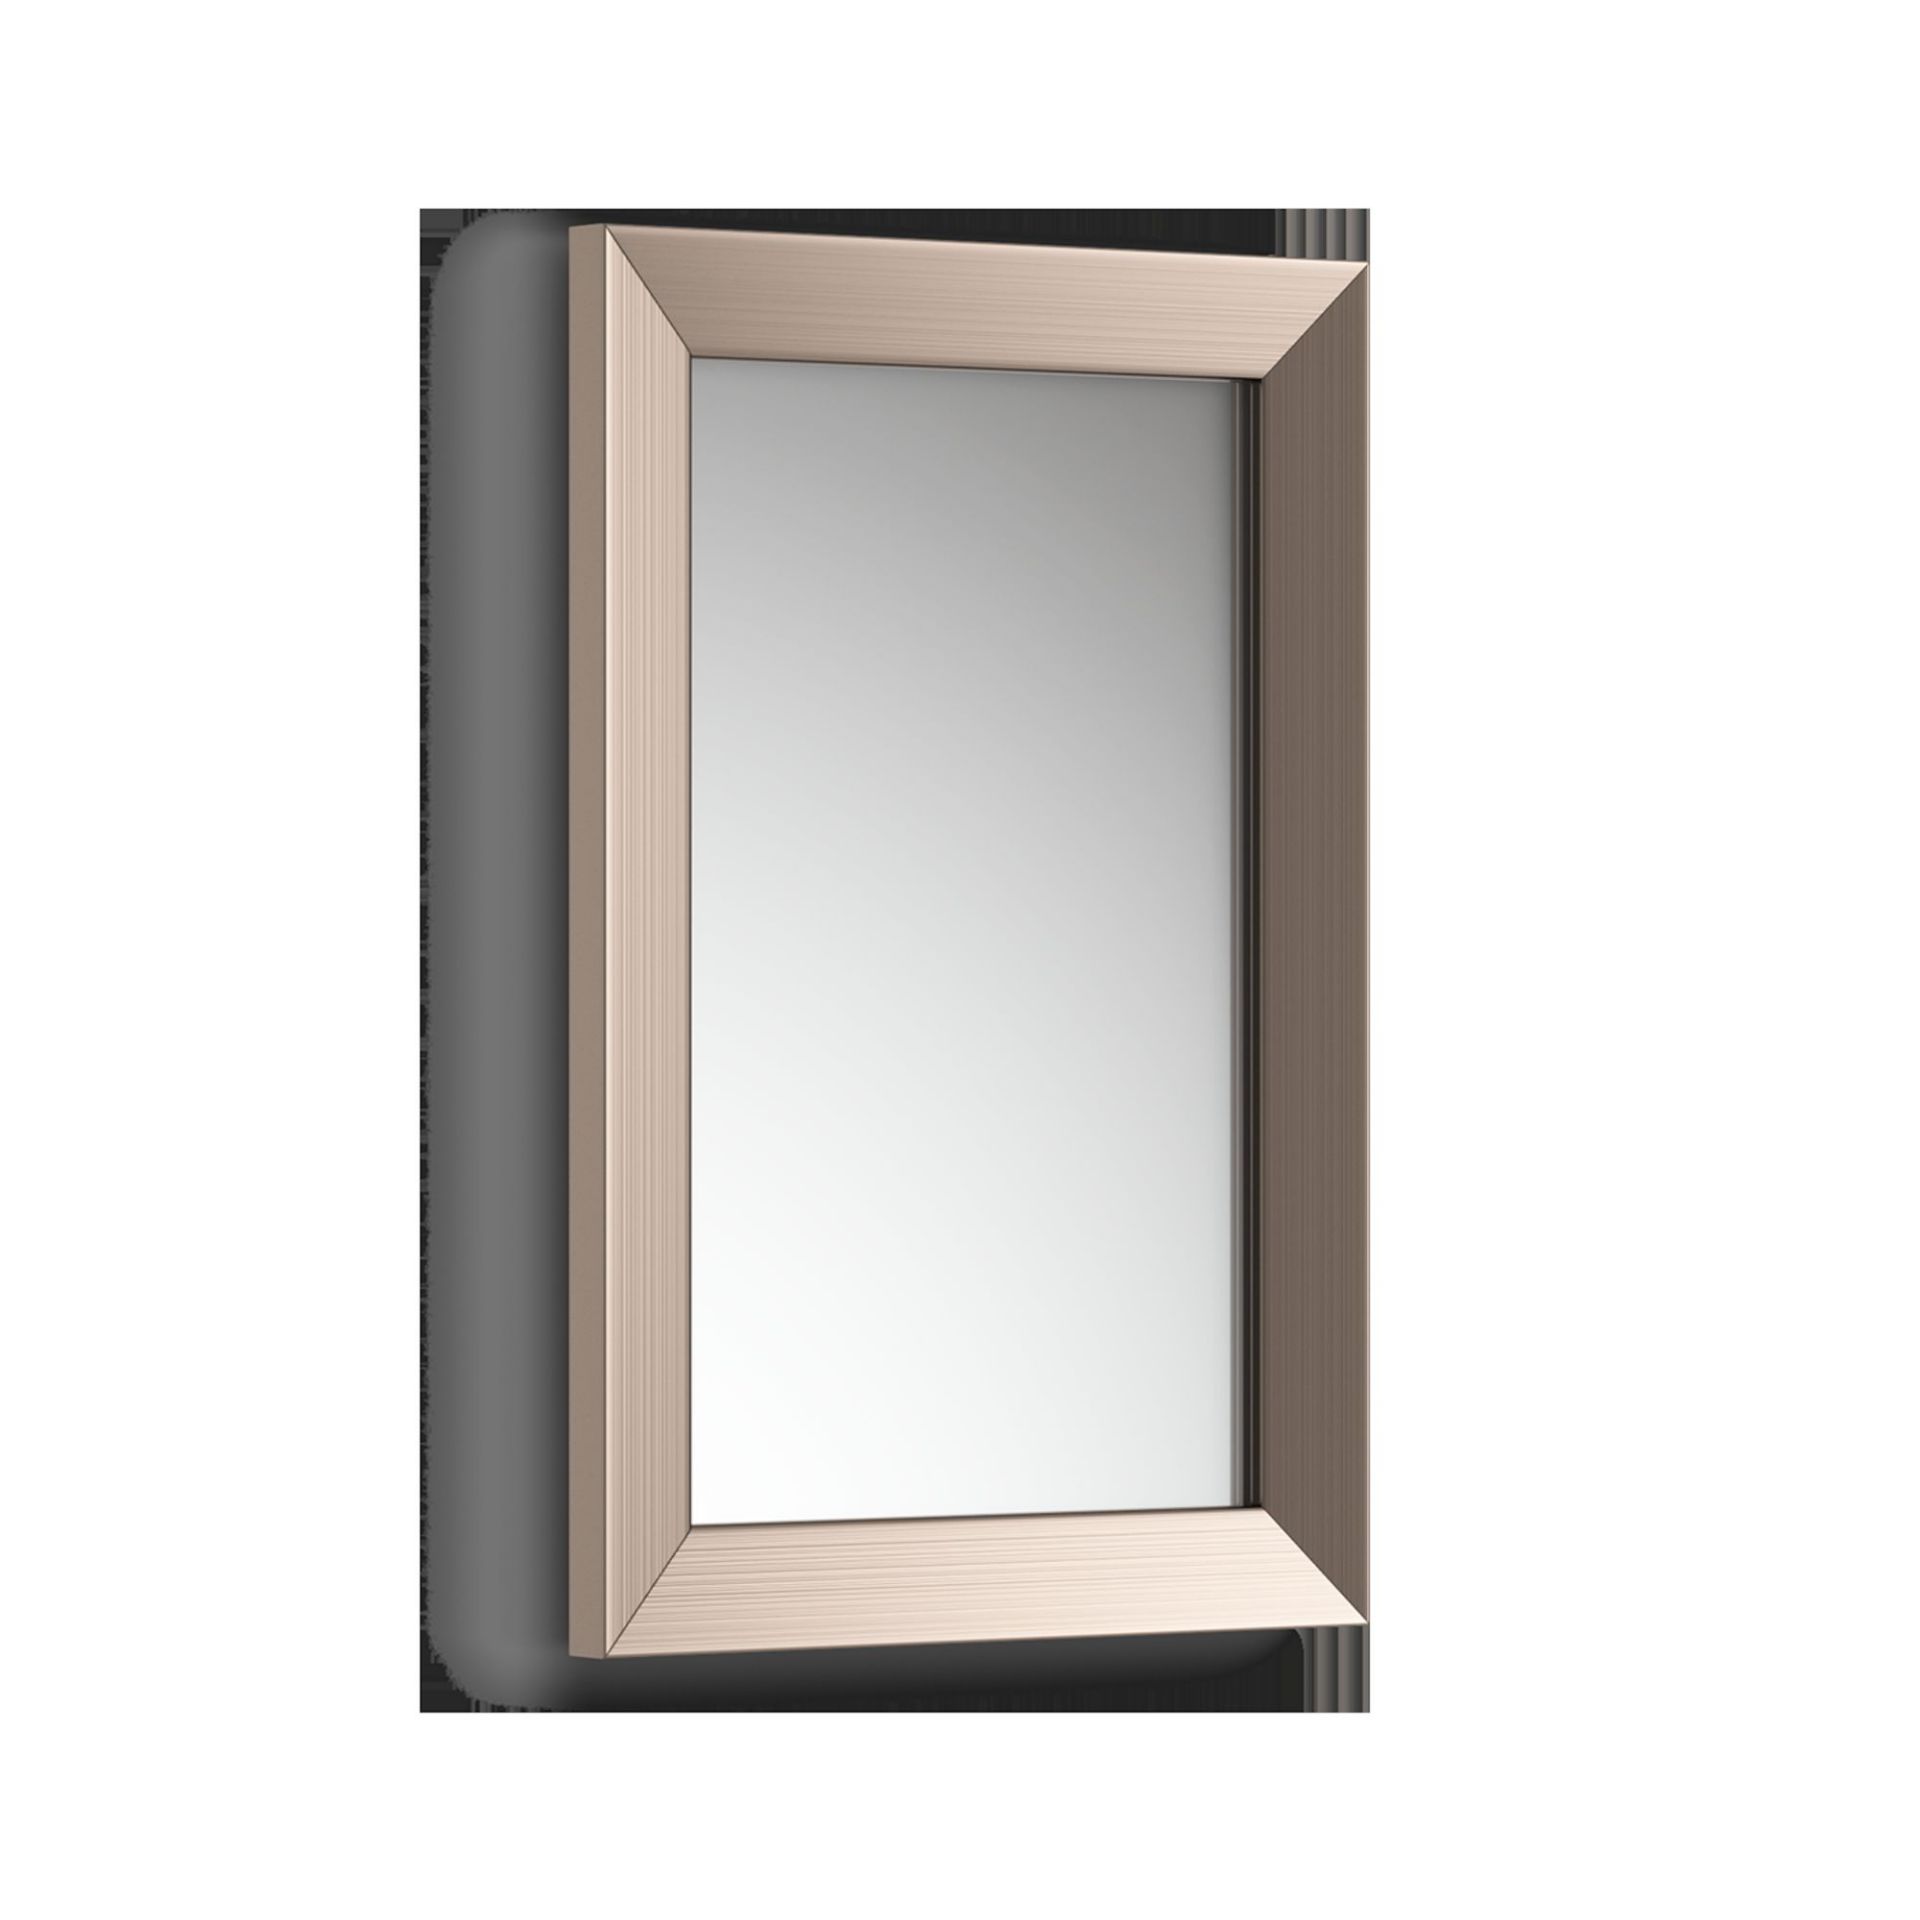 NEW 300x450mm Clover Metallic Nickel Framed Mirror. ML8005. Made from eco friendly recycled pl... - Image 3 of 3